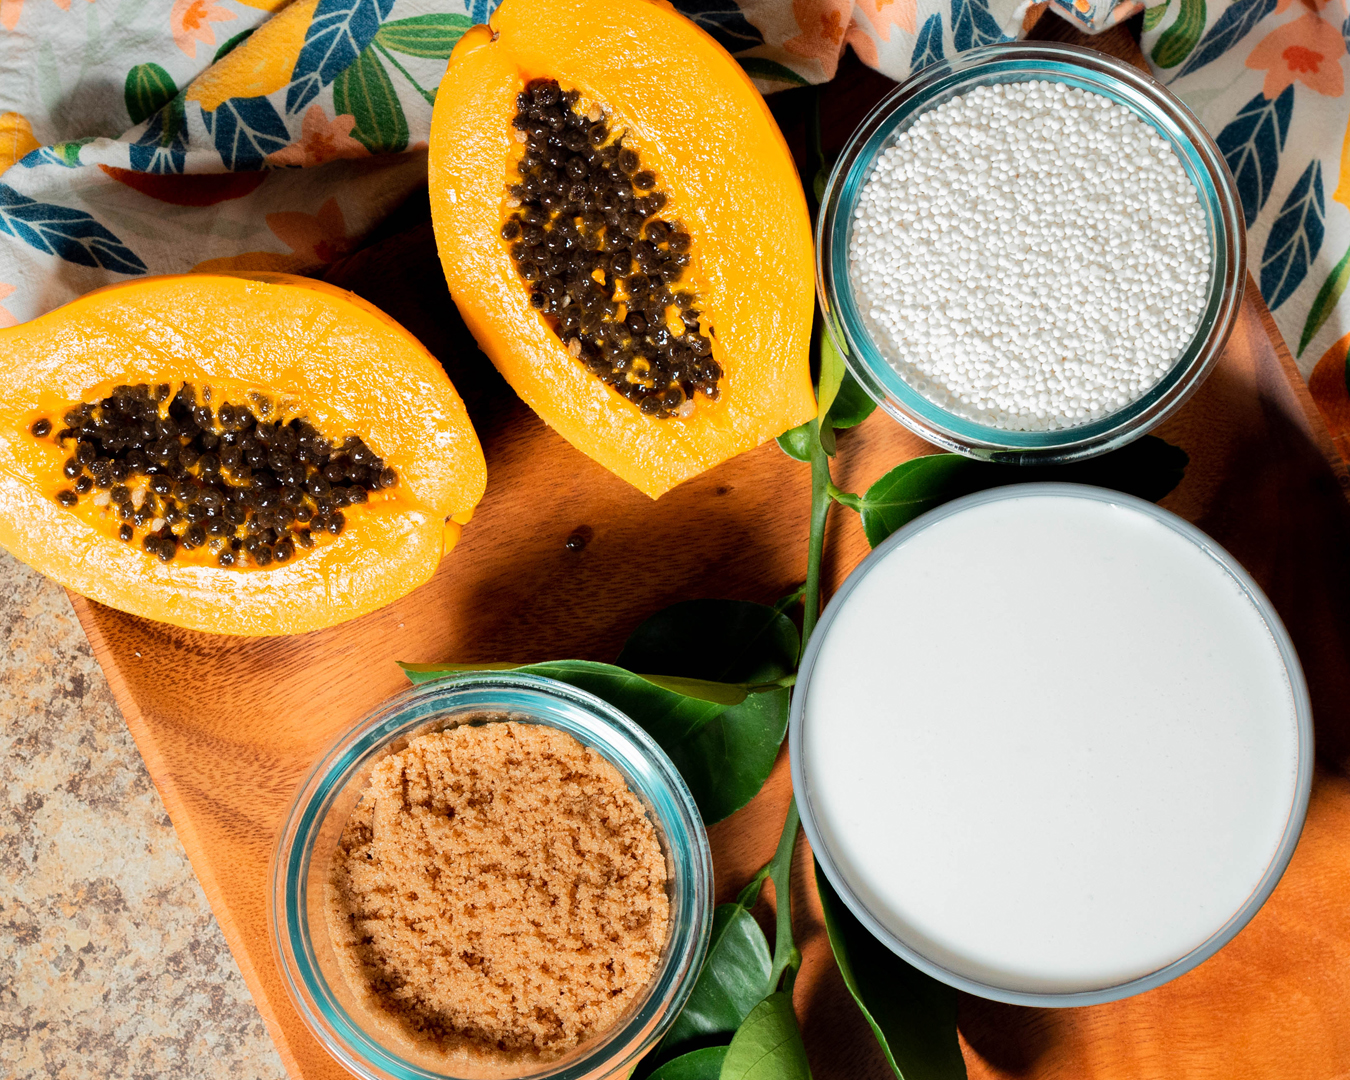 There are 5 basic ingredients that you need to make supoesi: ripe papaya, tapioca pearls, sugar, coconut milk, water, and lemon leaves (natural fragrance).